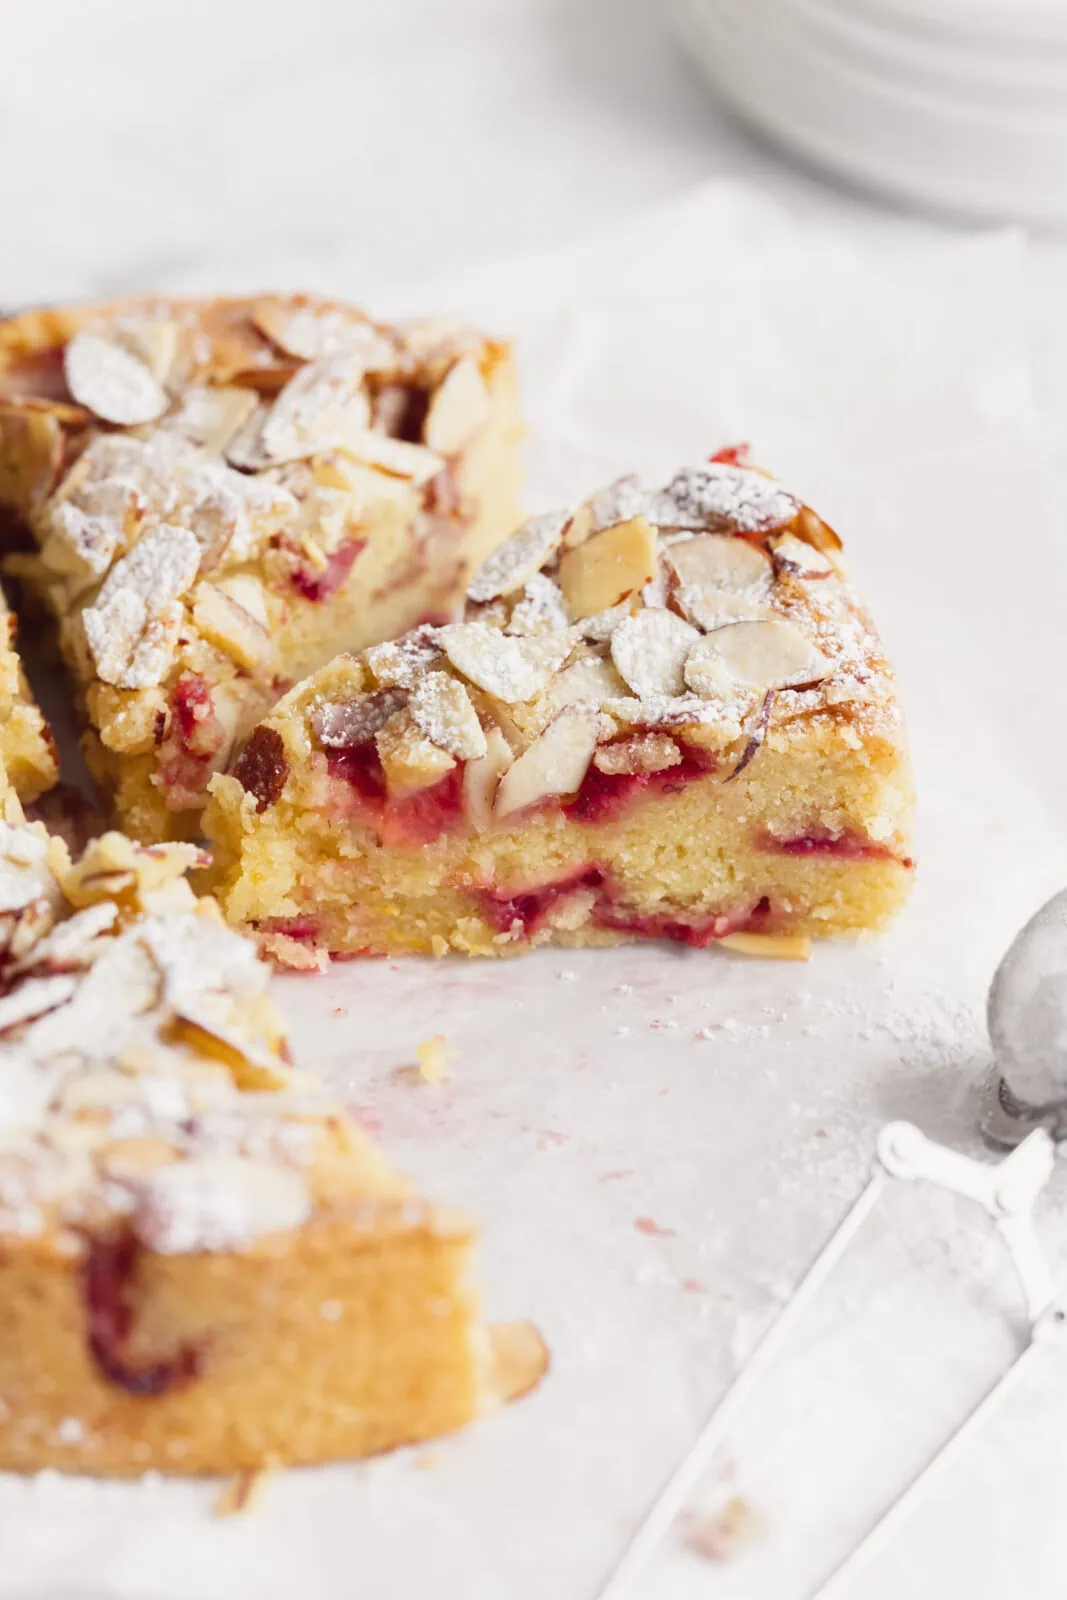 strawberry almond cake with slivered almonds and powdered sugar